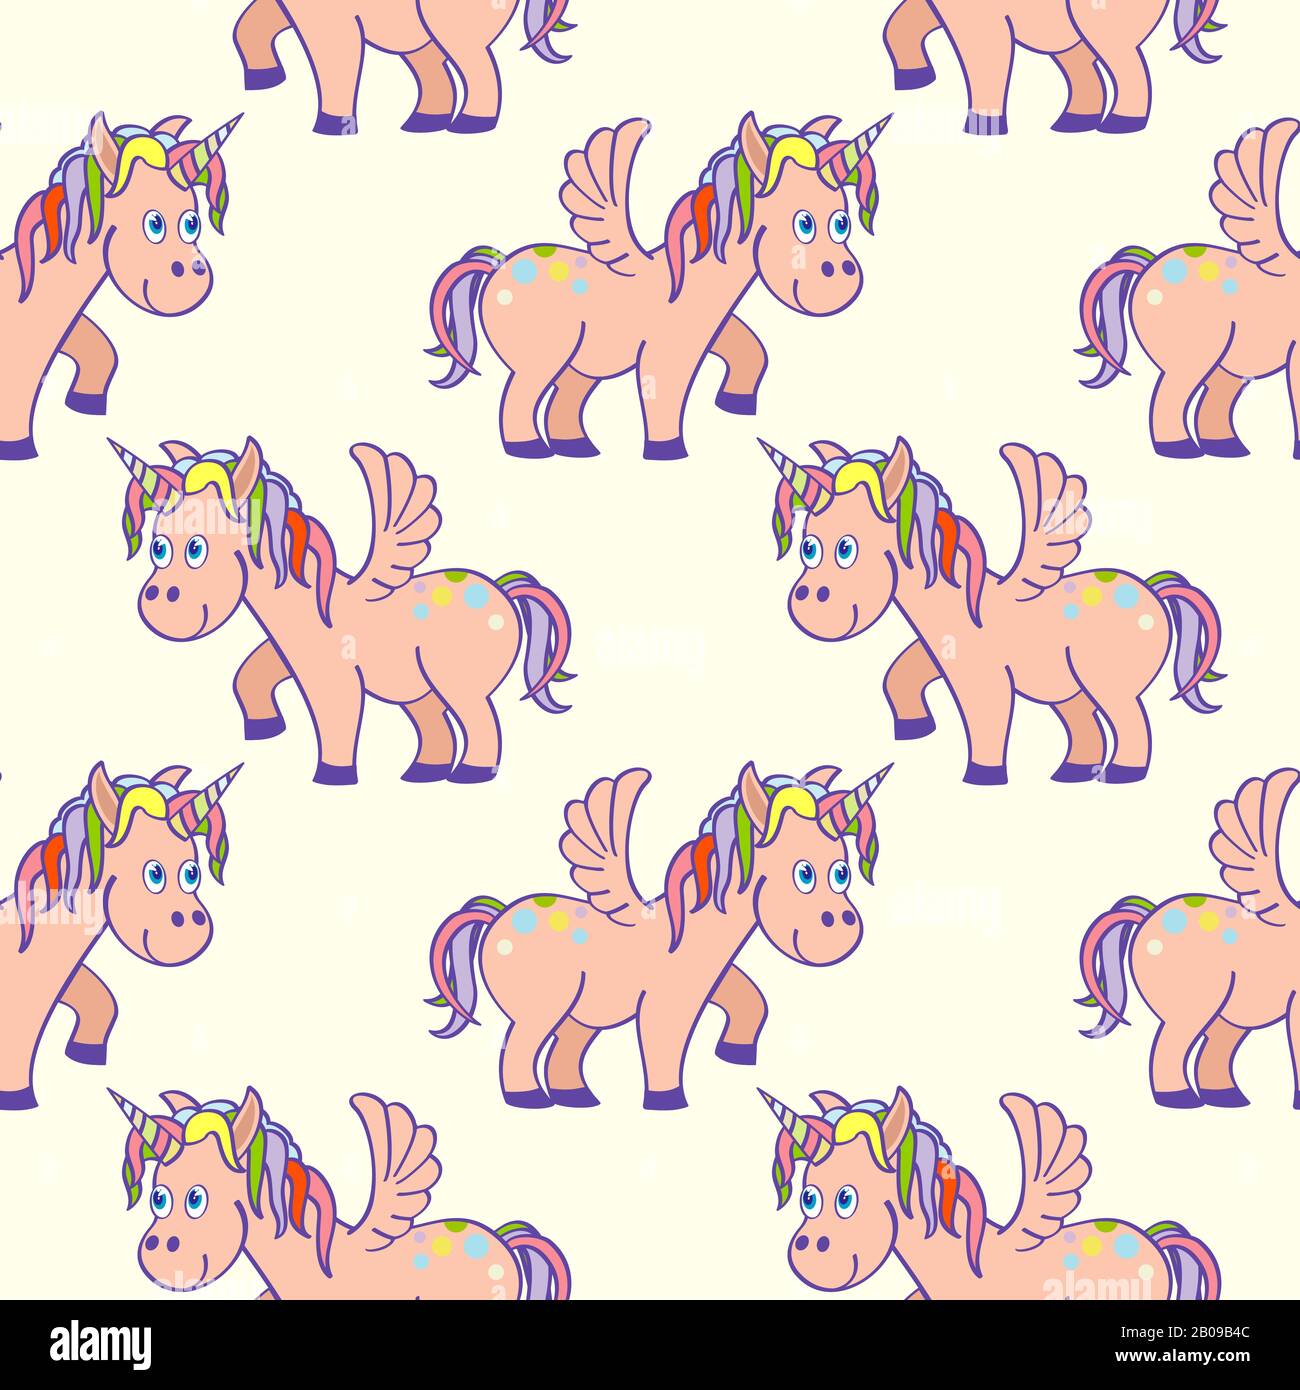 Pastel colored hand drawn unicorns seamless pattern. Magic pony with horn illustration Stock Vector